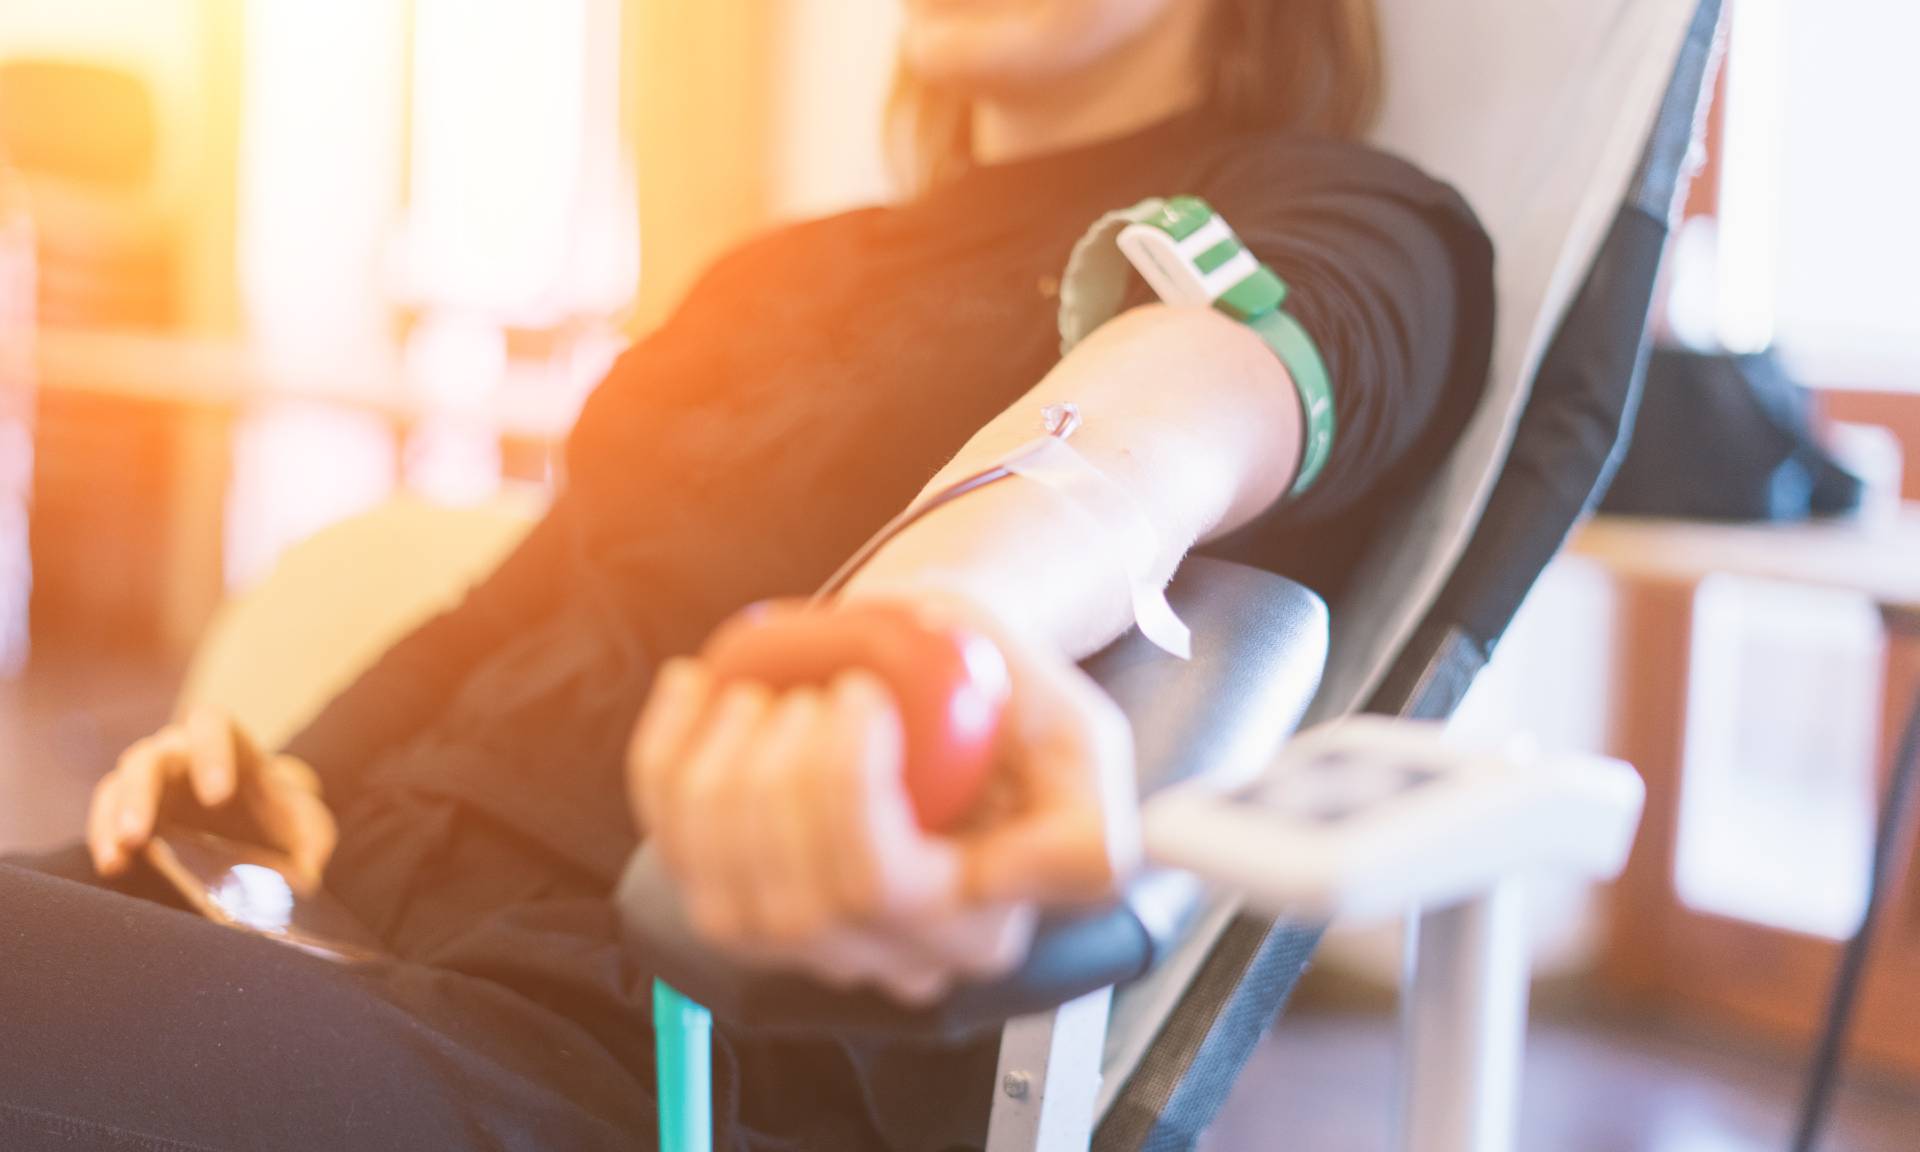 Young woman with arm outstretched and hand squeezing small red rubber ball who is donating blood. 